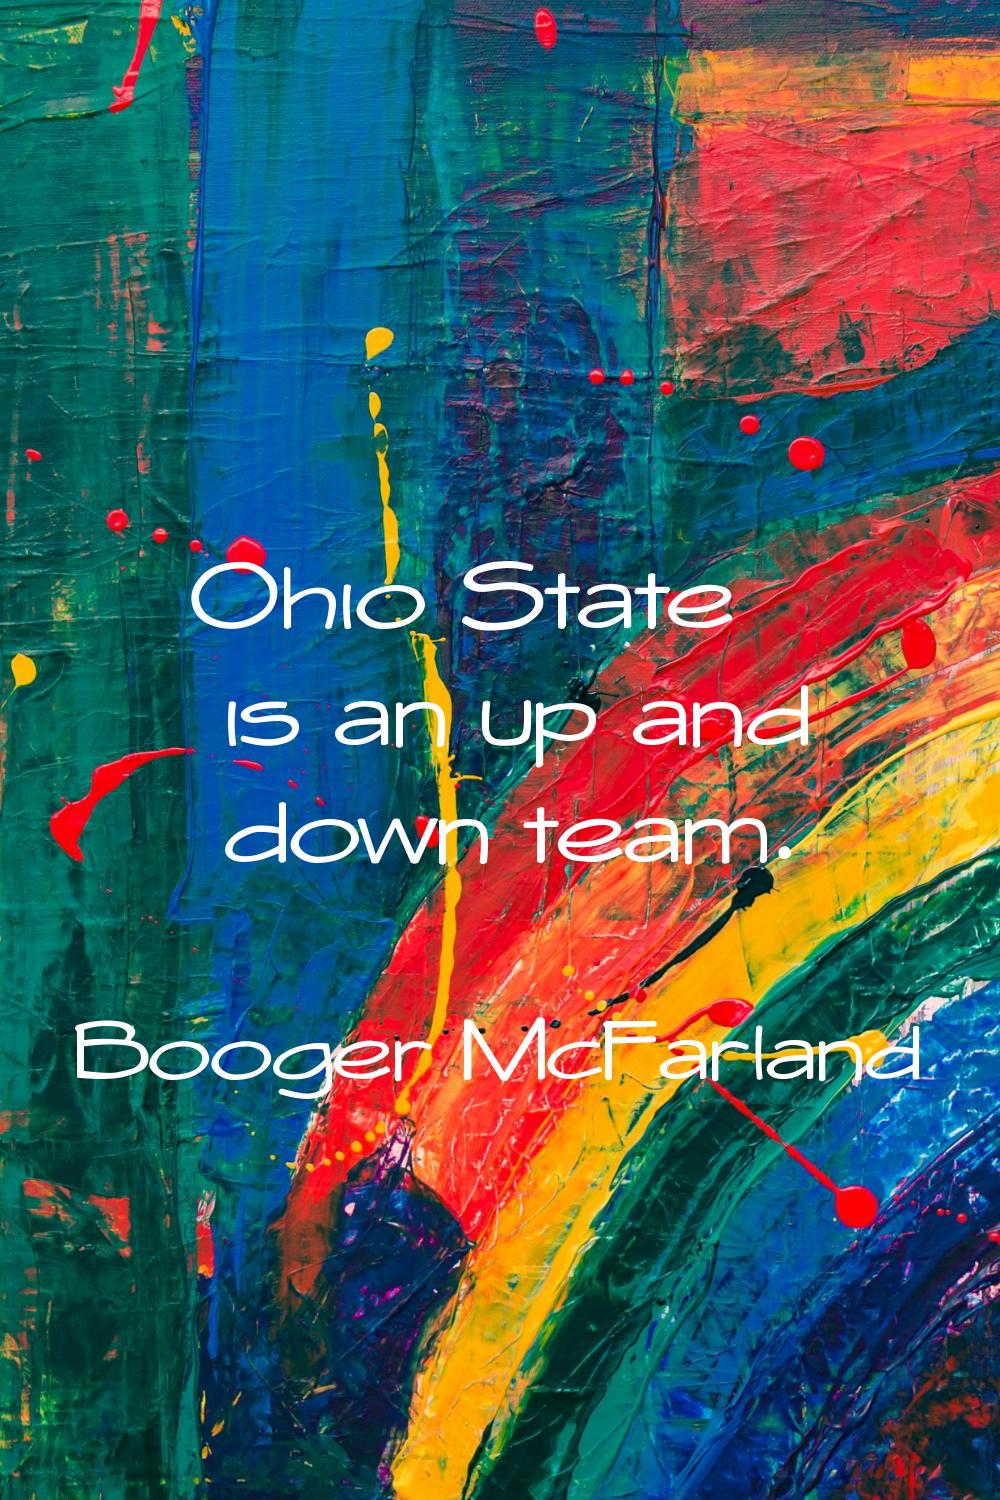 Ohio State is an up and down team.